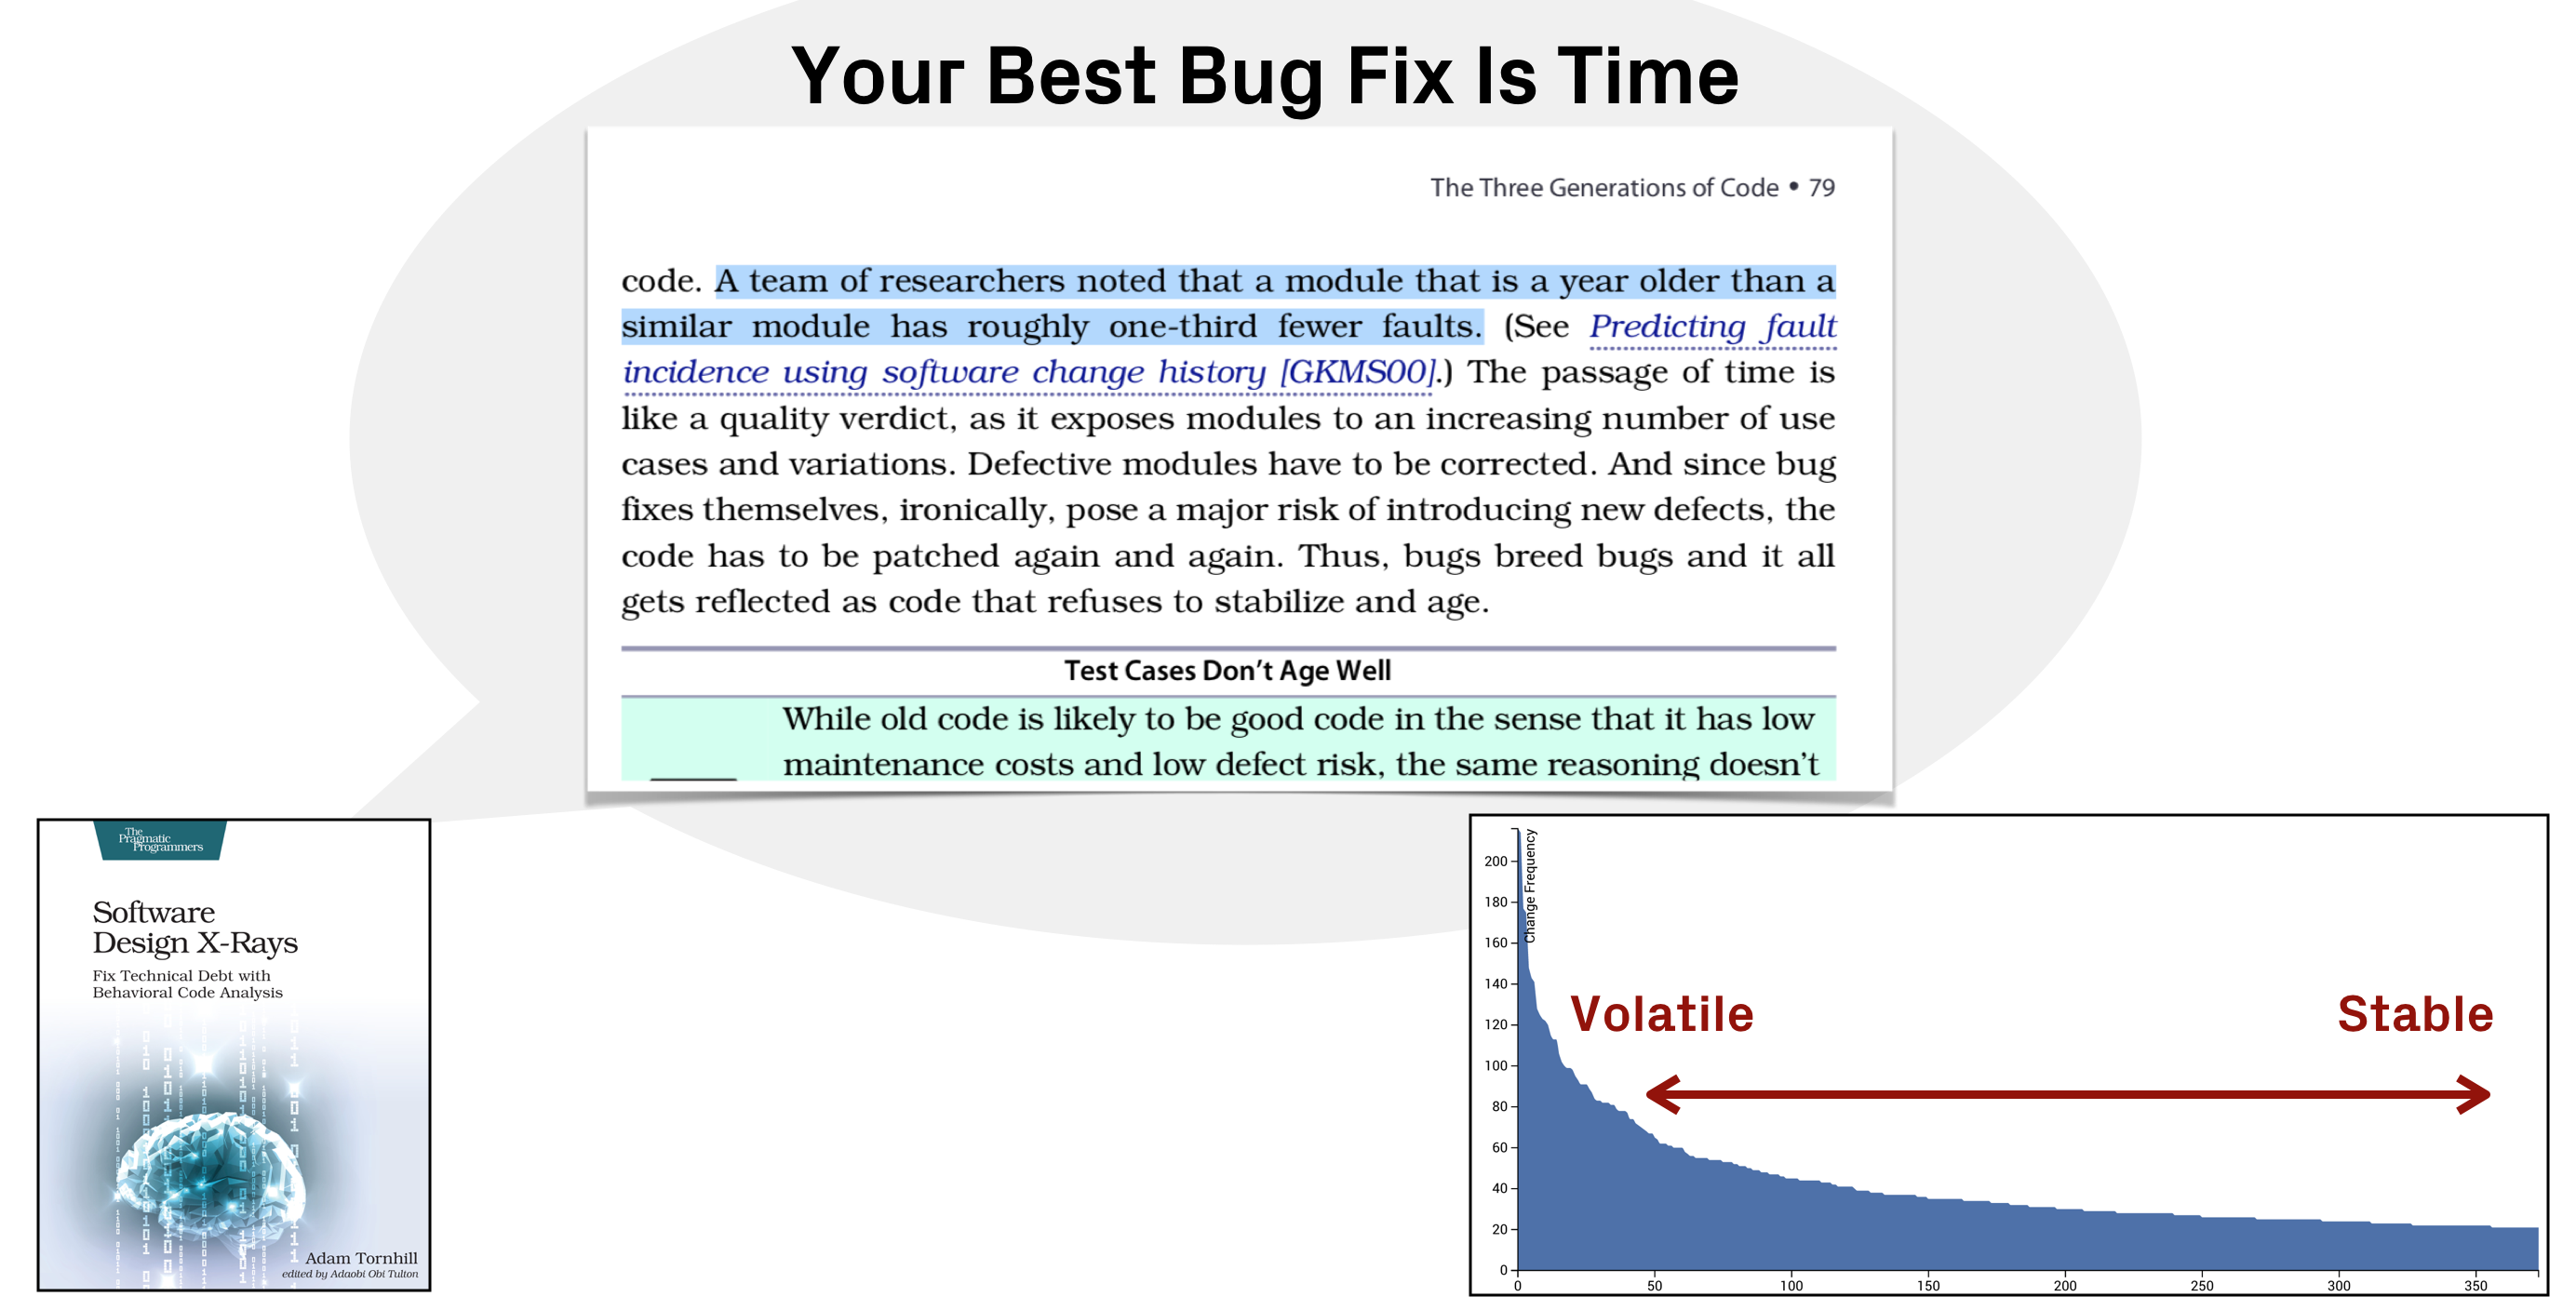 Your best bug fix is time.